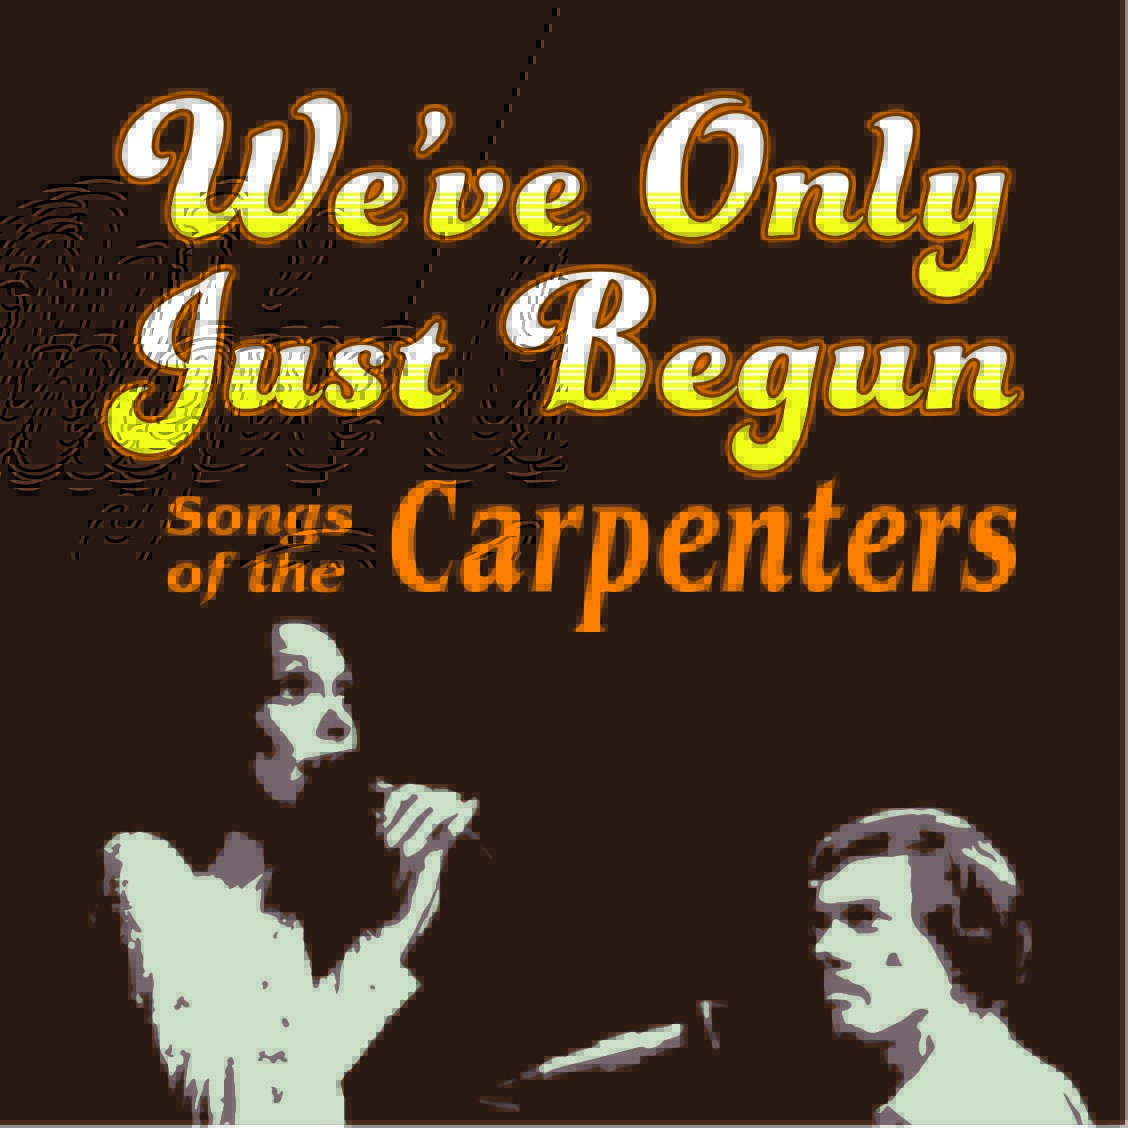 Sonic Youth Superstar carpenters carpenters songs